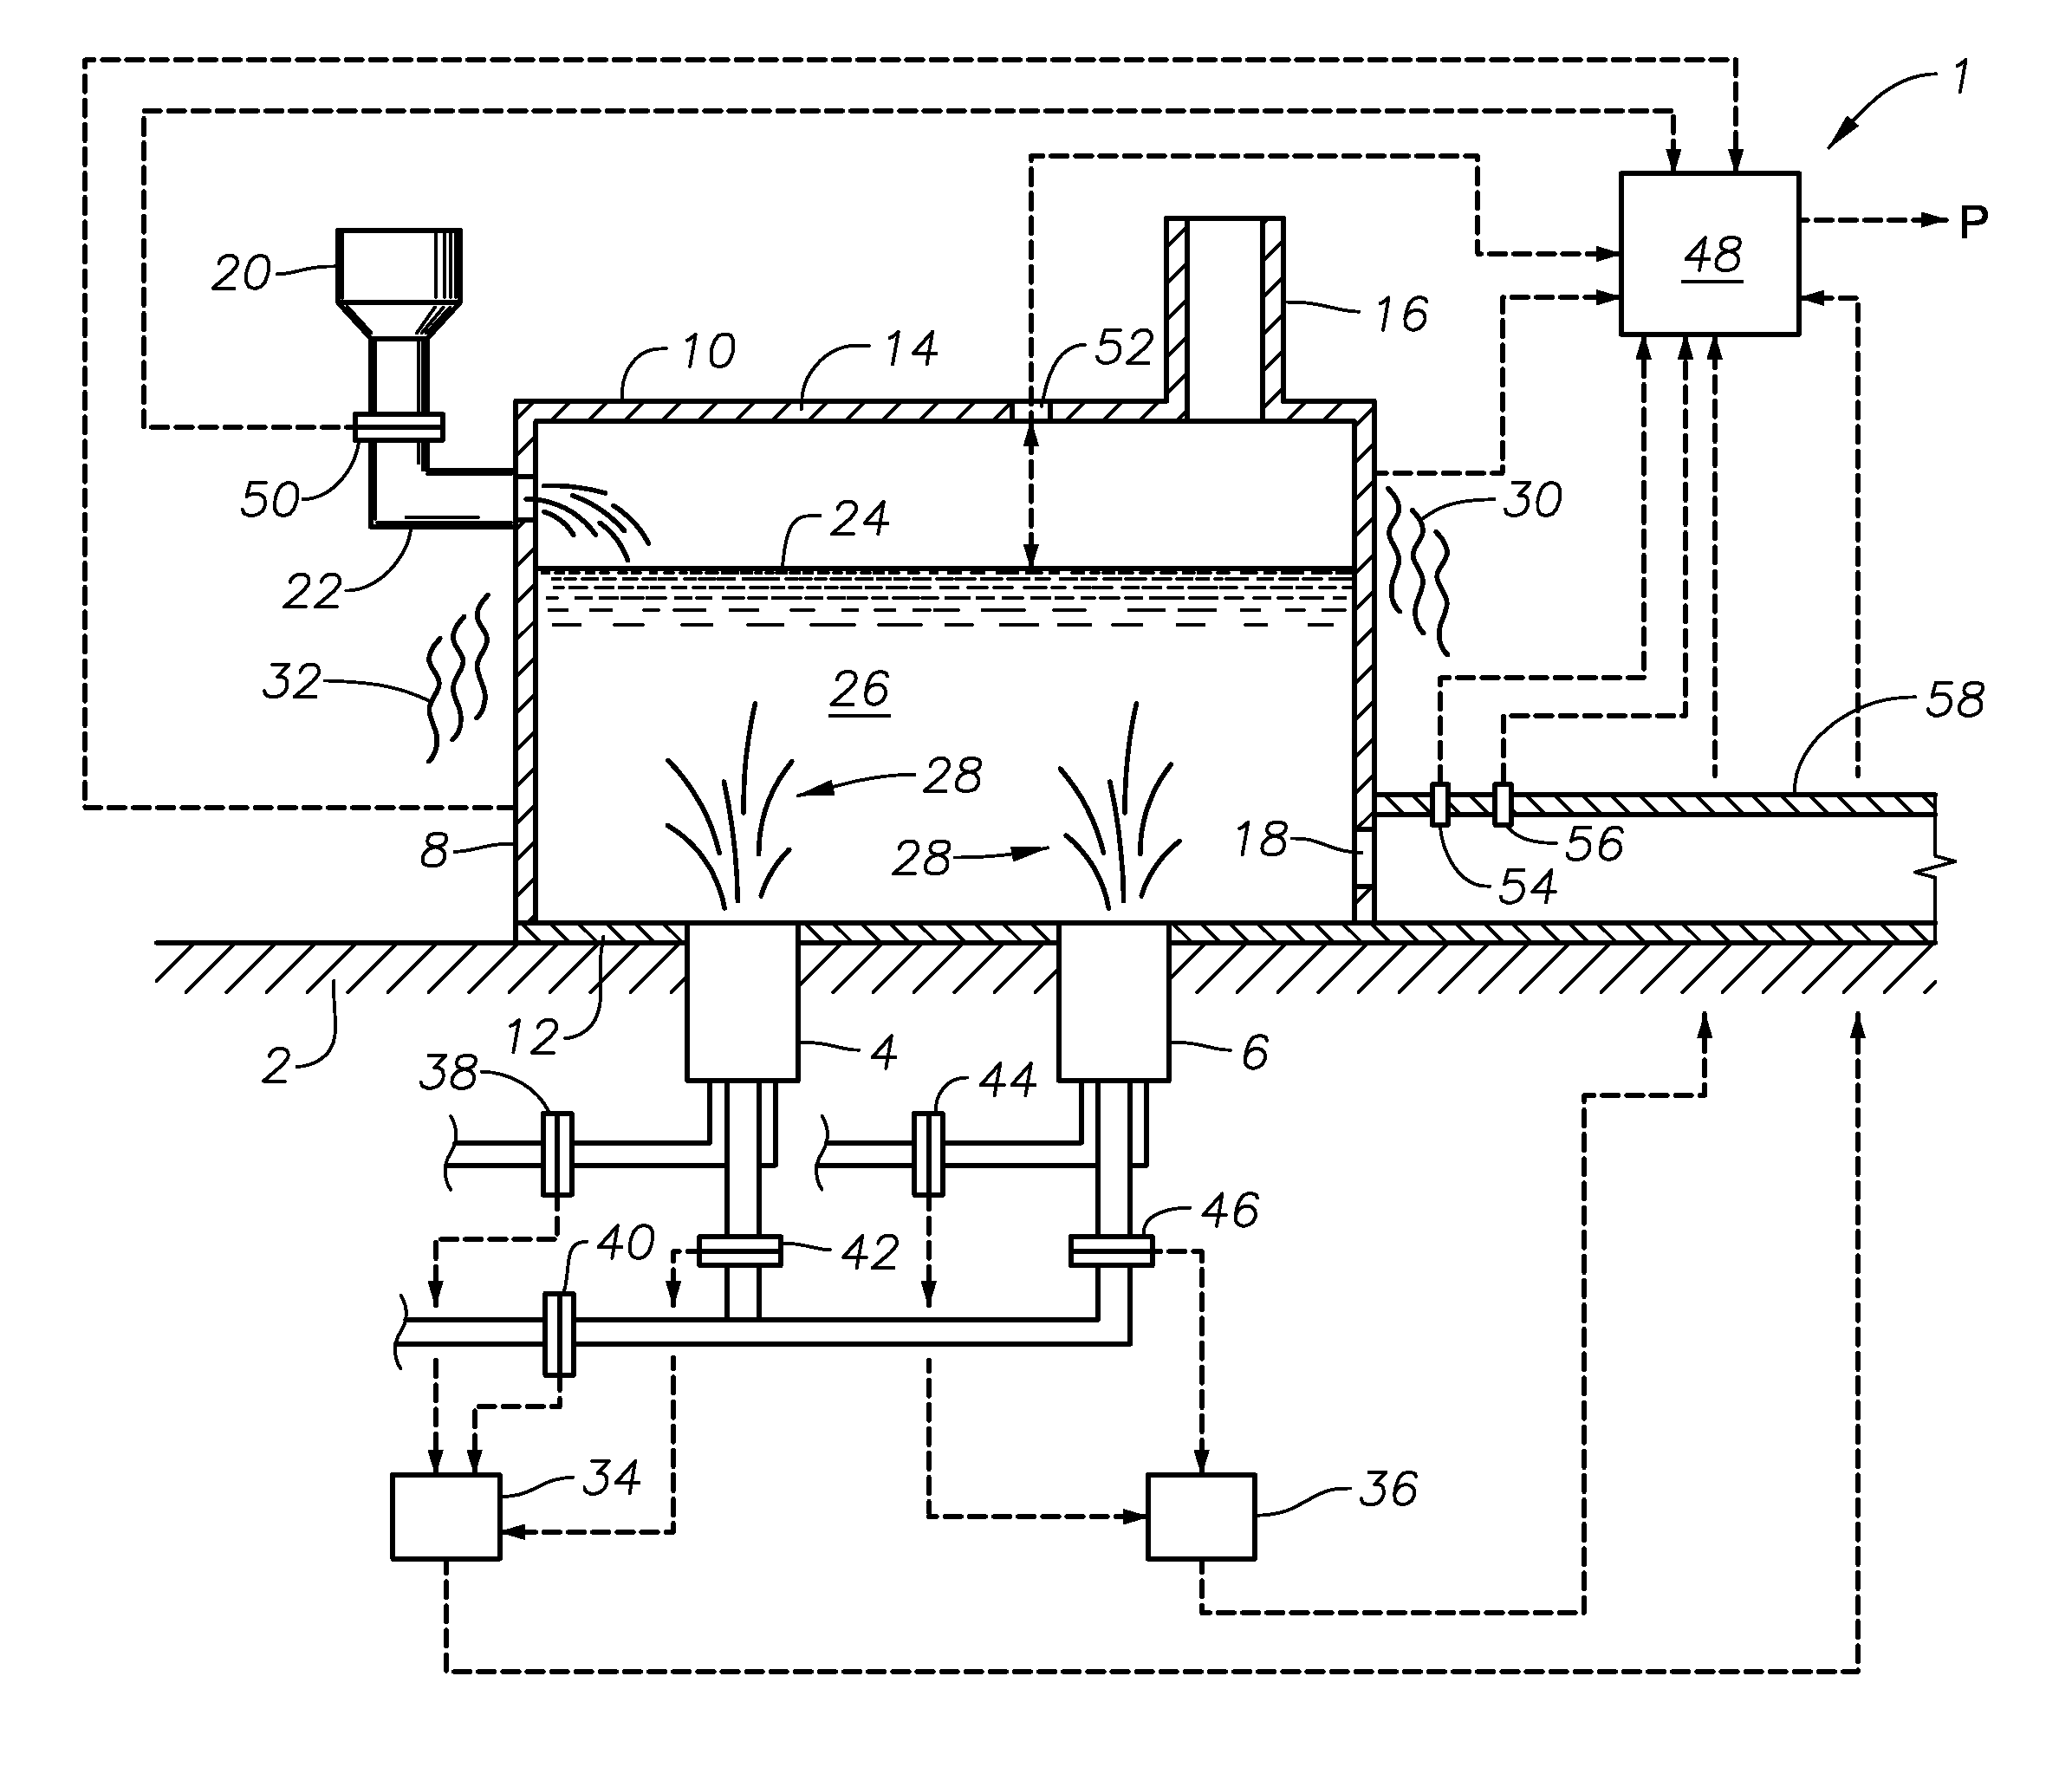 Methods of using a submerged combustion melter to produce glass products